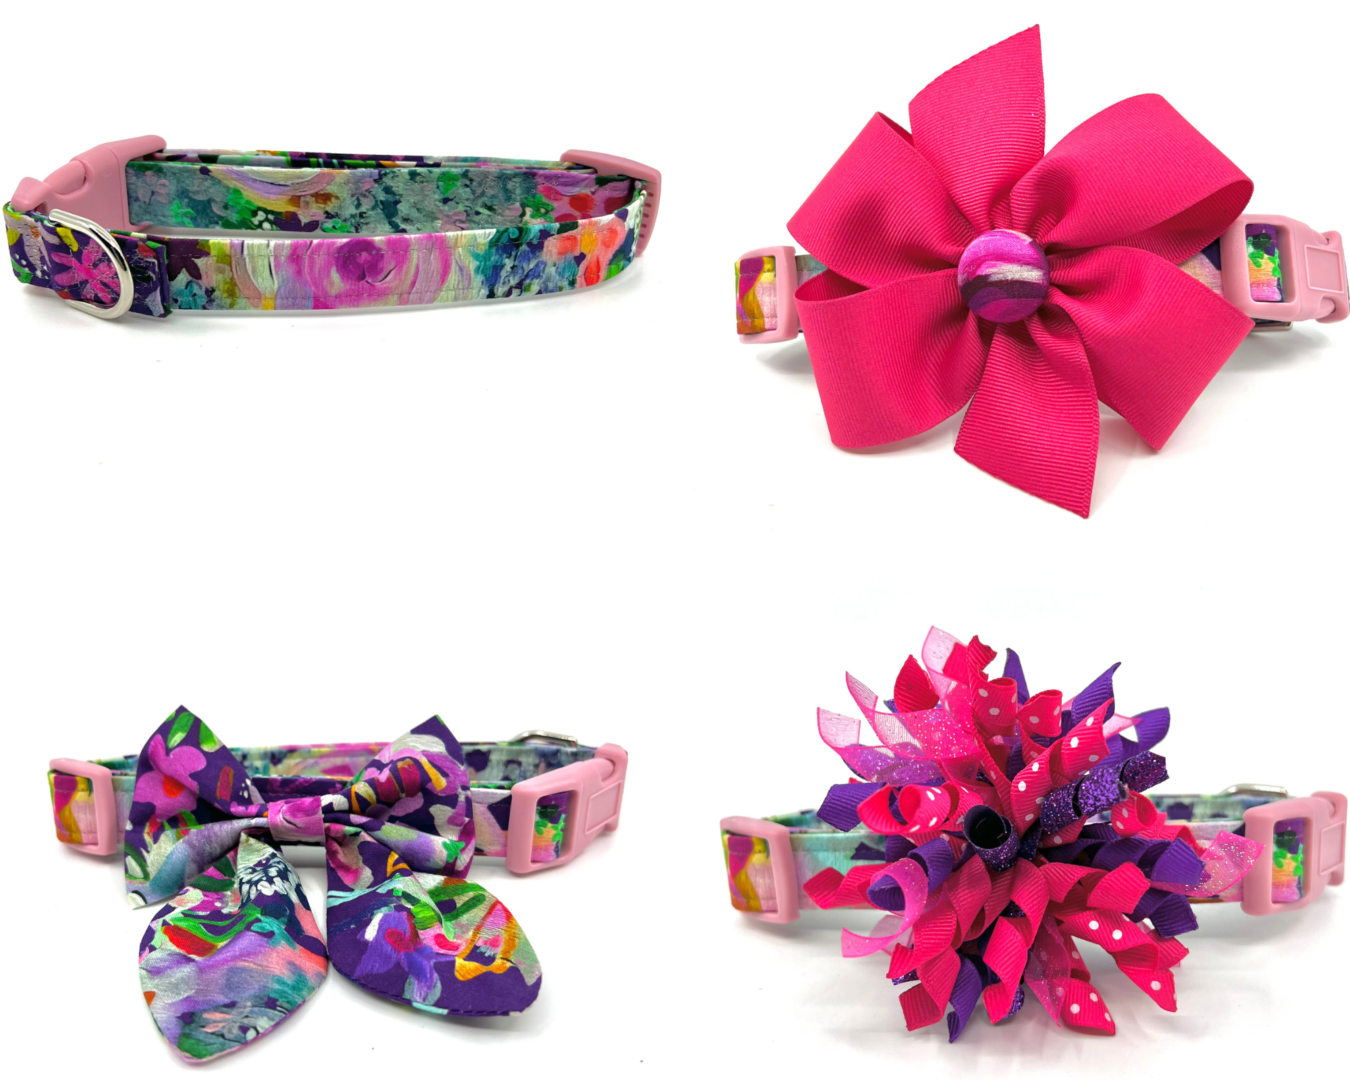 A collection of colorful dog collars and bows.